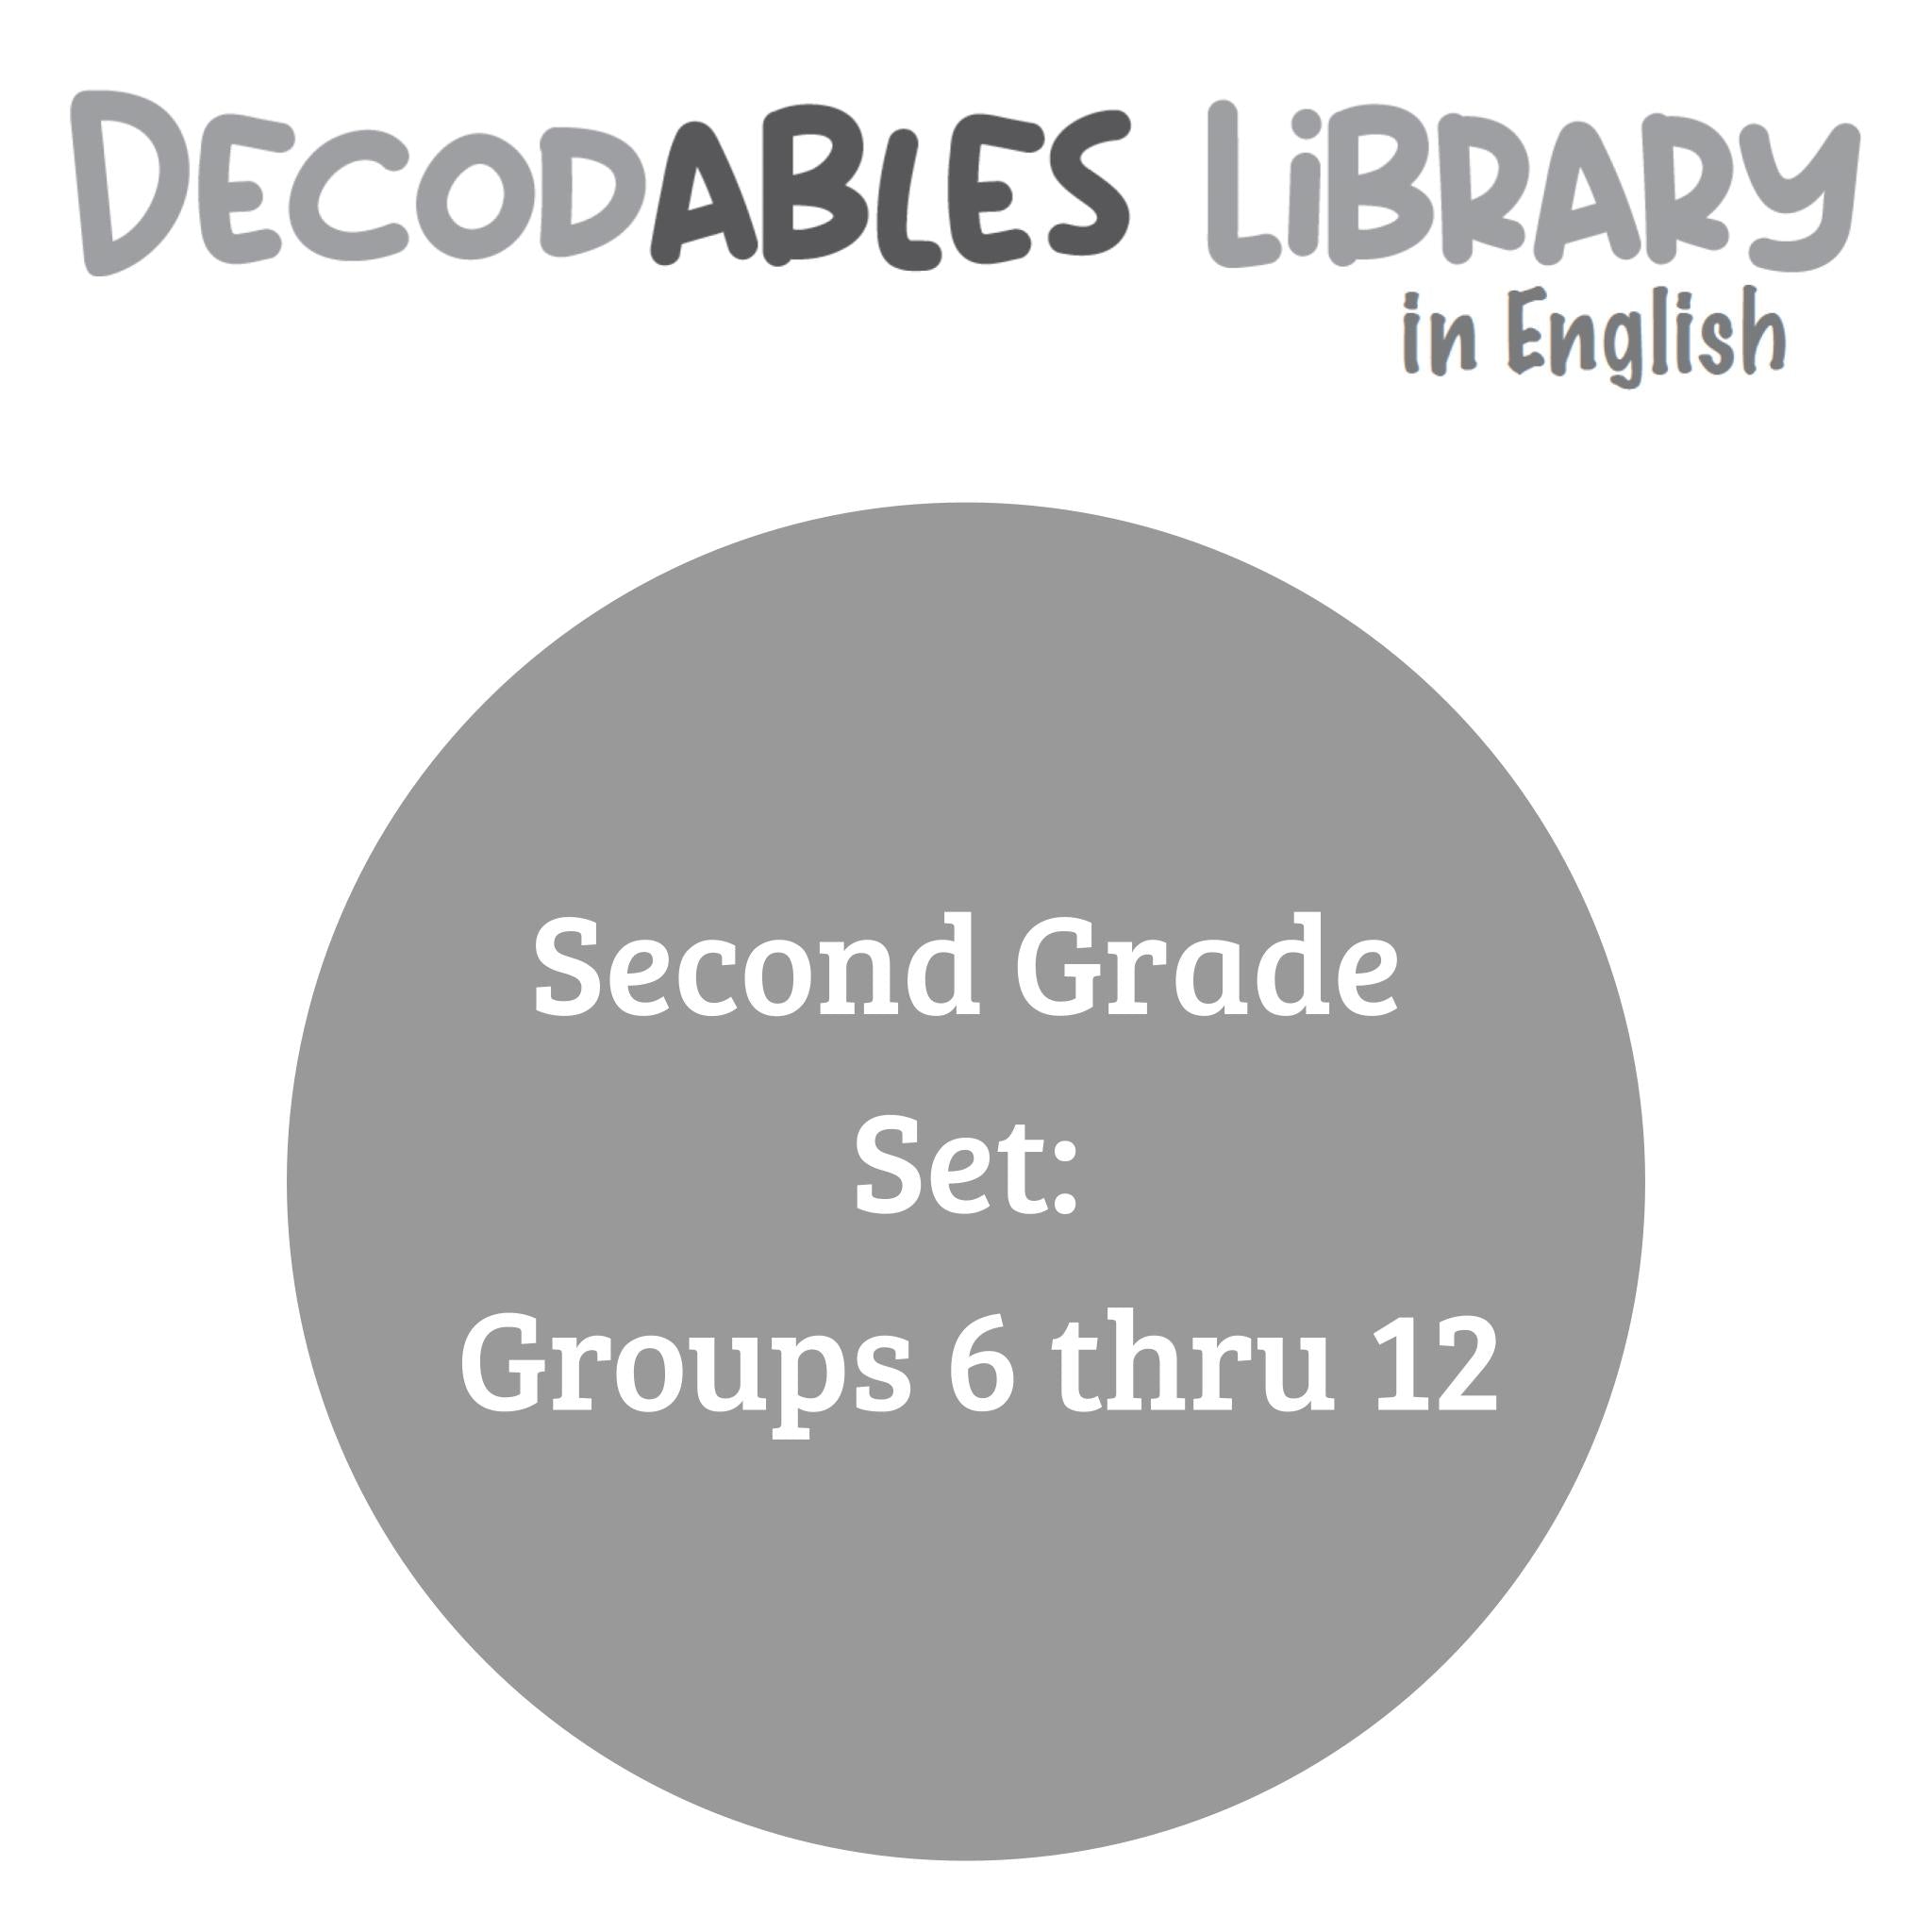 English Decodables Library - Second Grade Set (Includes Groups 6 thru 12)